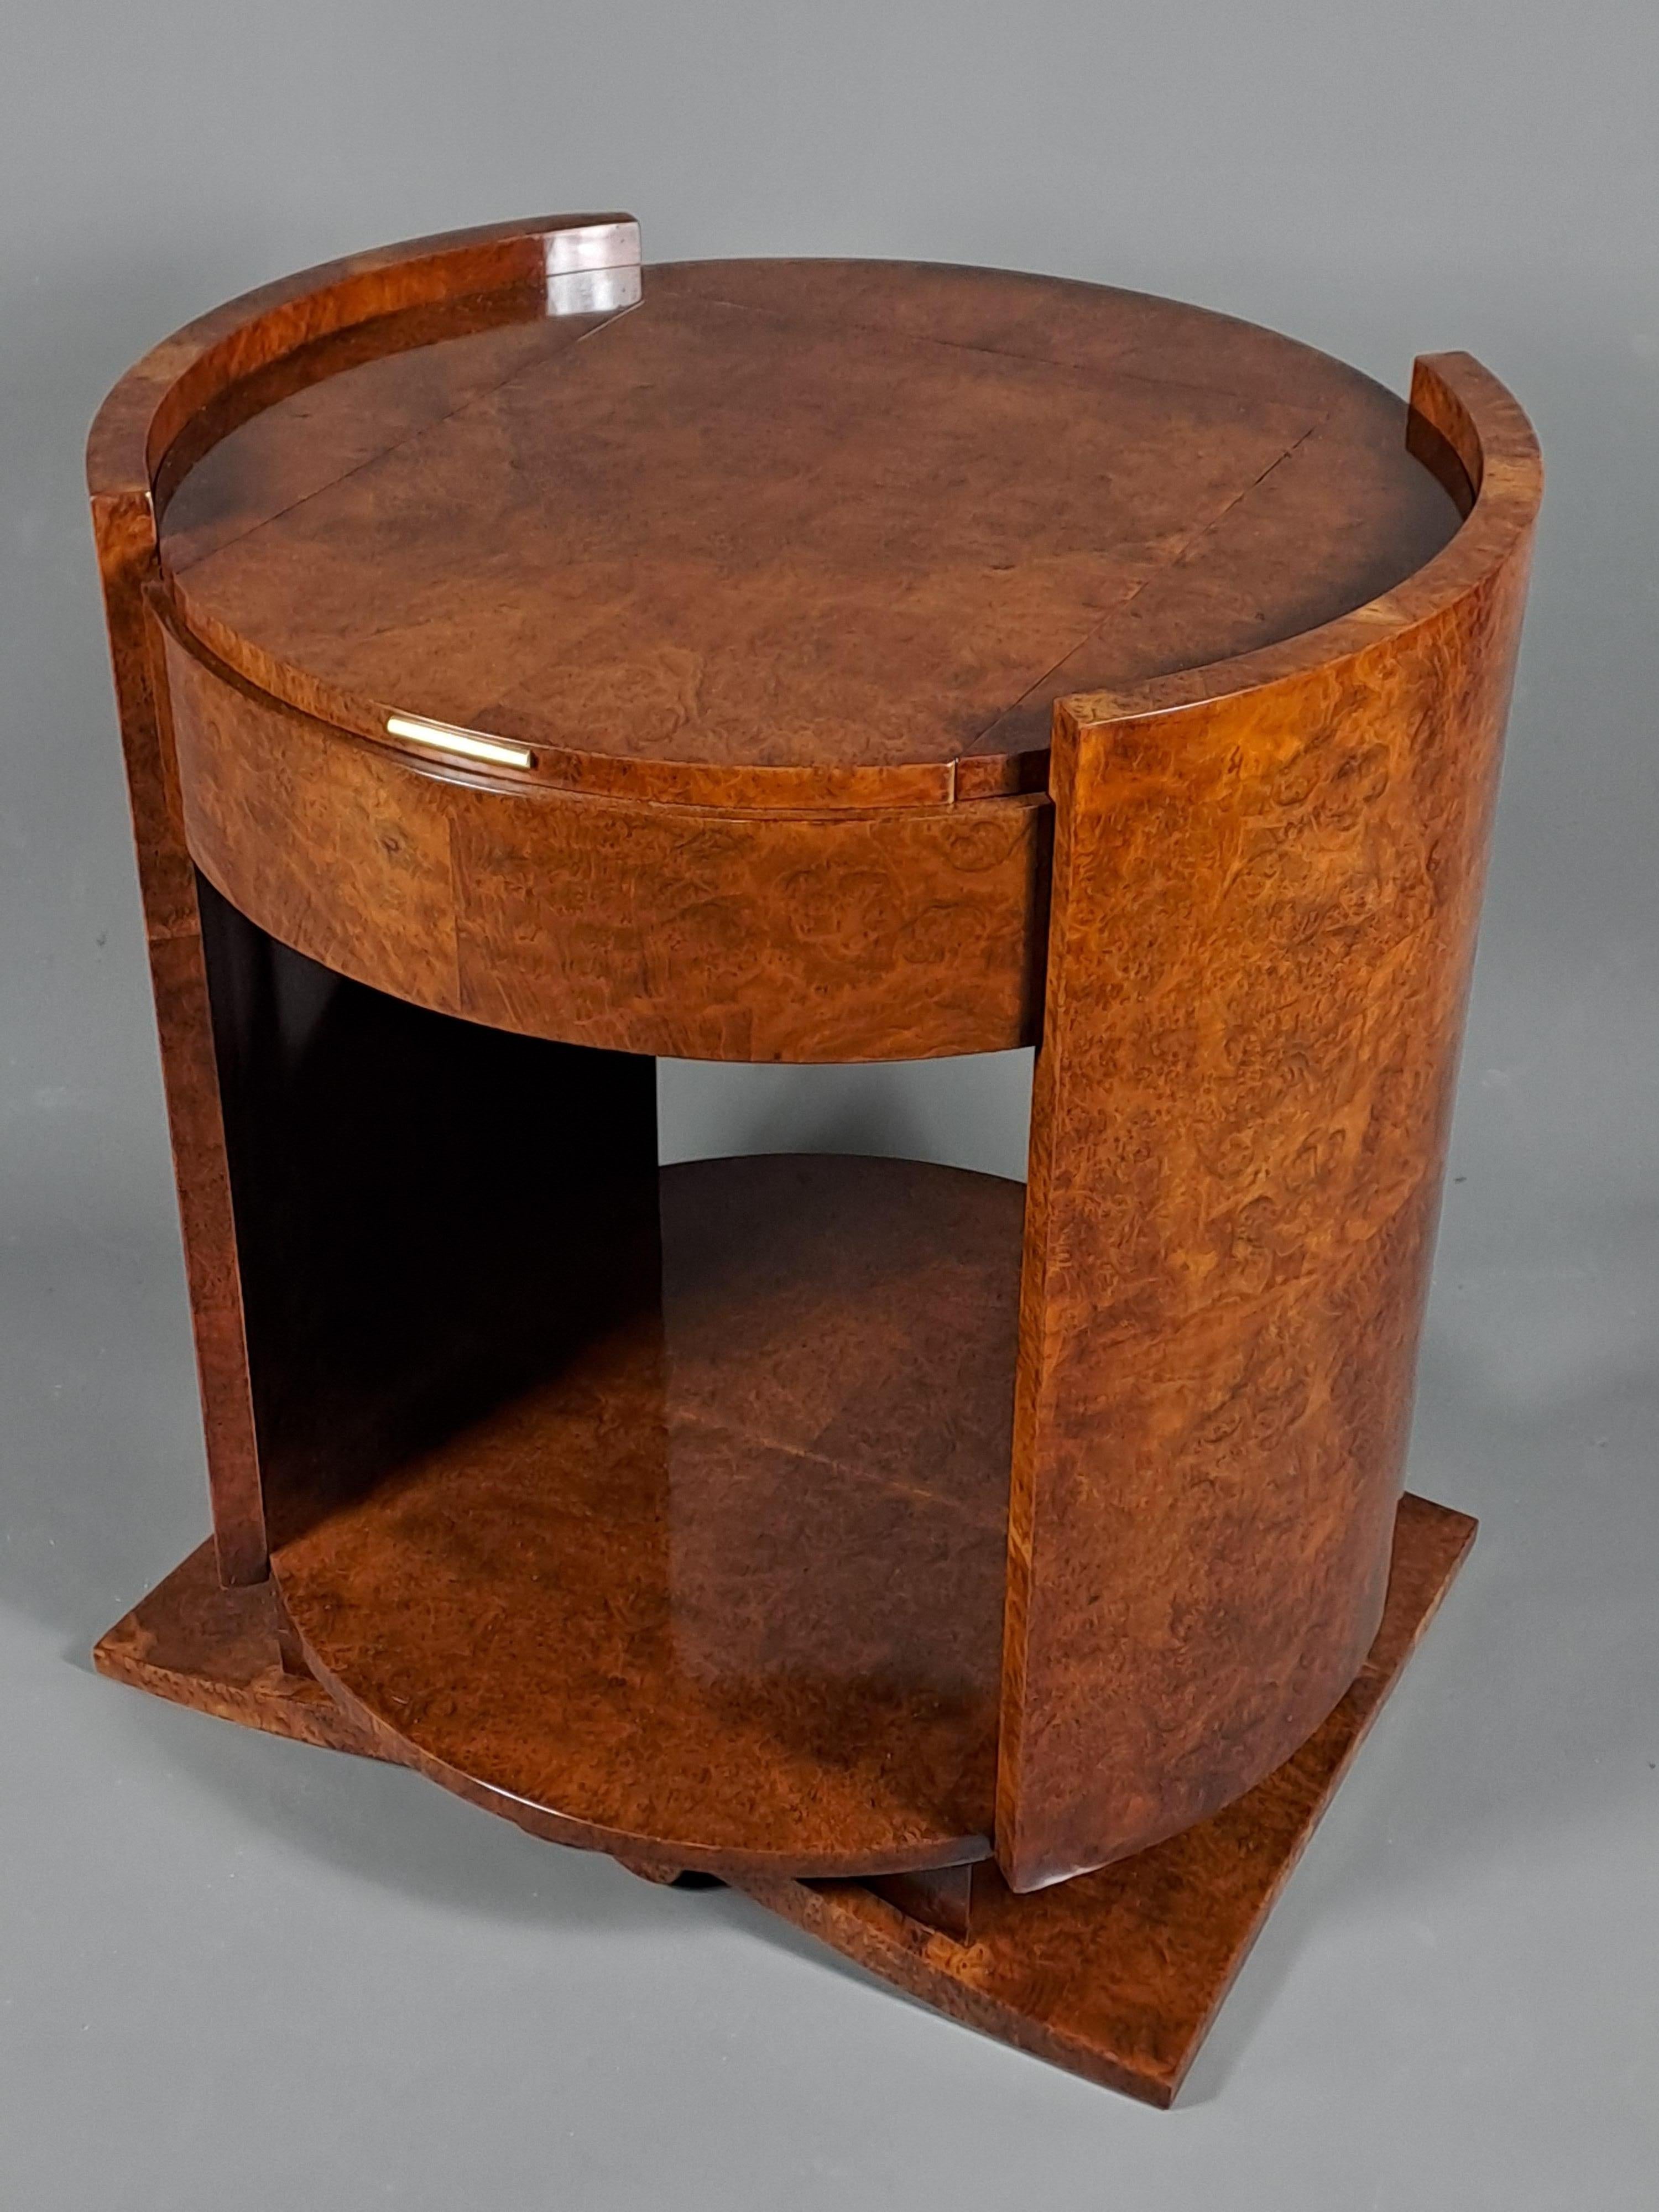 Cylindrical piece of furniture in the shape of a pedestal table forming a dressing table or or worker table with a drop-leaf top revealing a mirror and storage space.

Parisian work of superb quality.

CIRCA 1940

Superb piece to be attributed to a